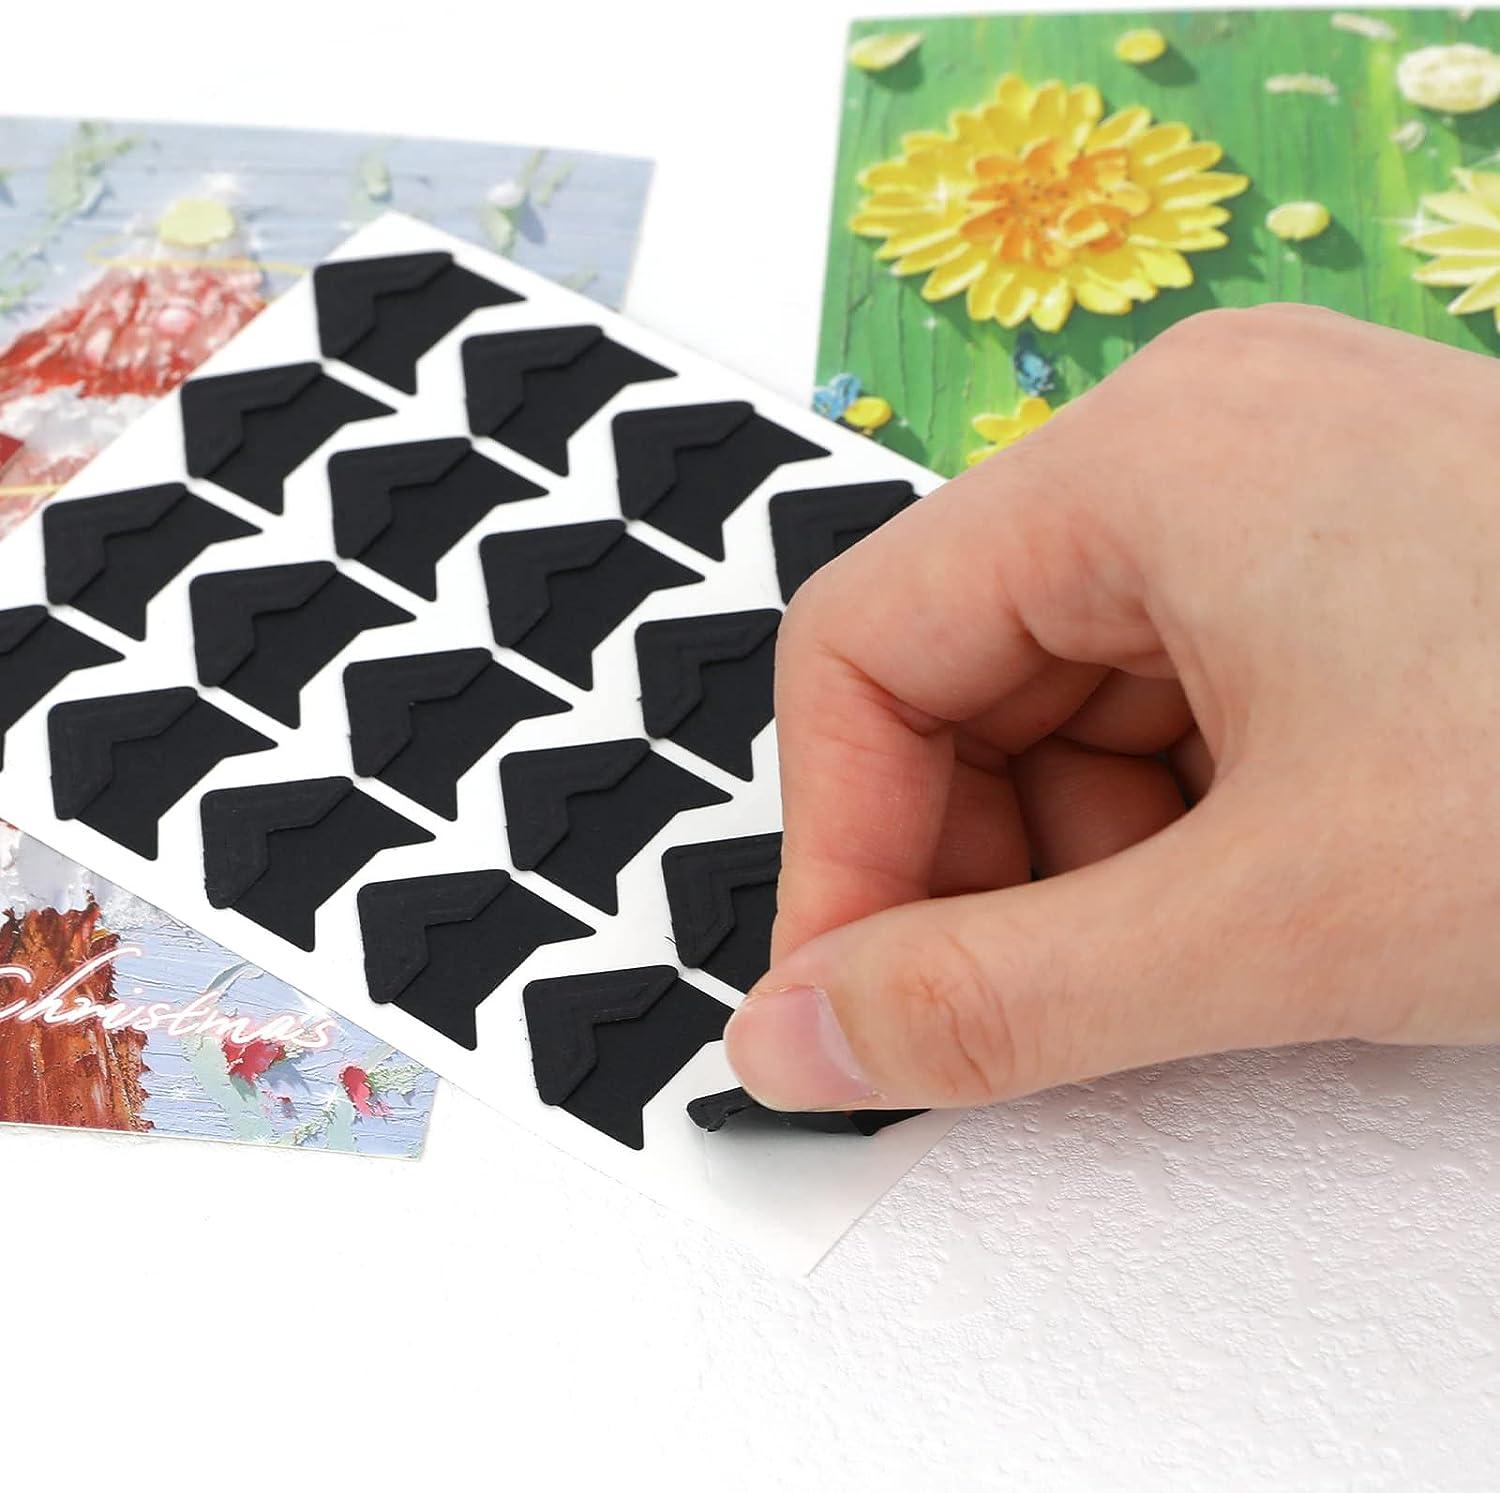 Books by Hand BBHM215PS Self-Adhesive Photo Corners Acid-Free Archival Quality. 0.5 inch. Pack of 252. BLACK.